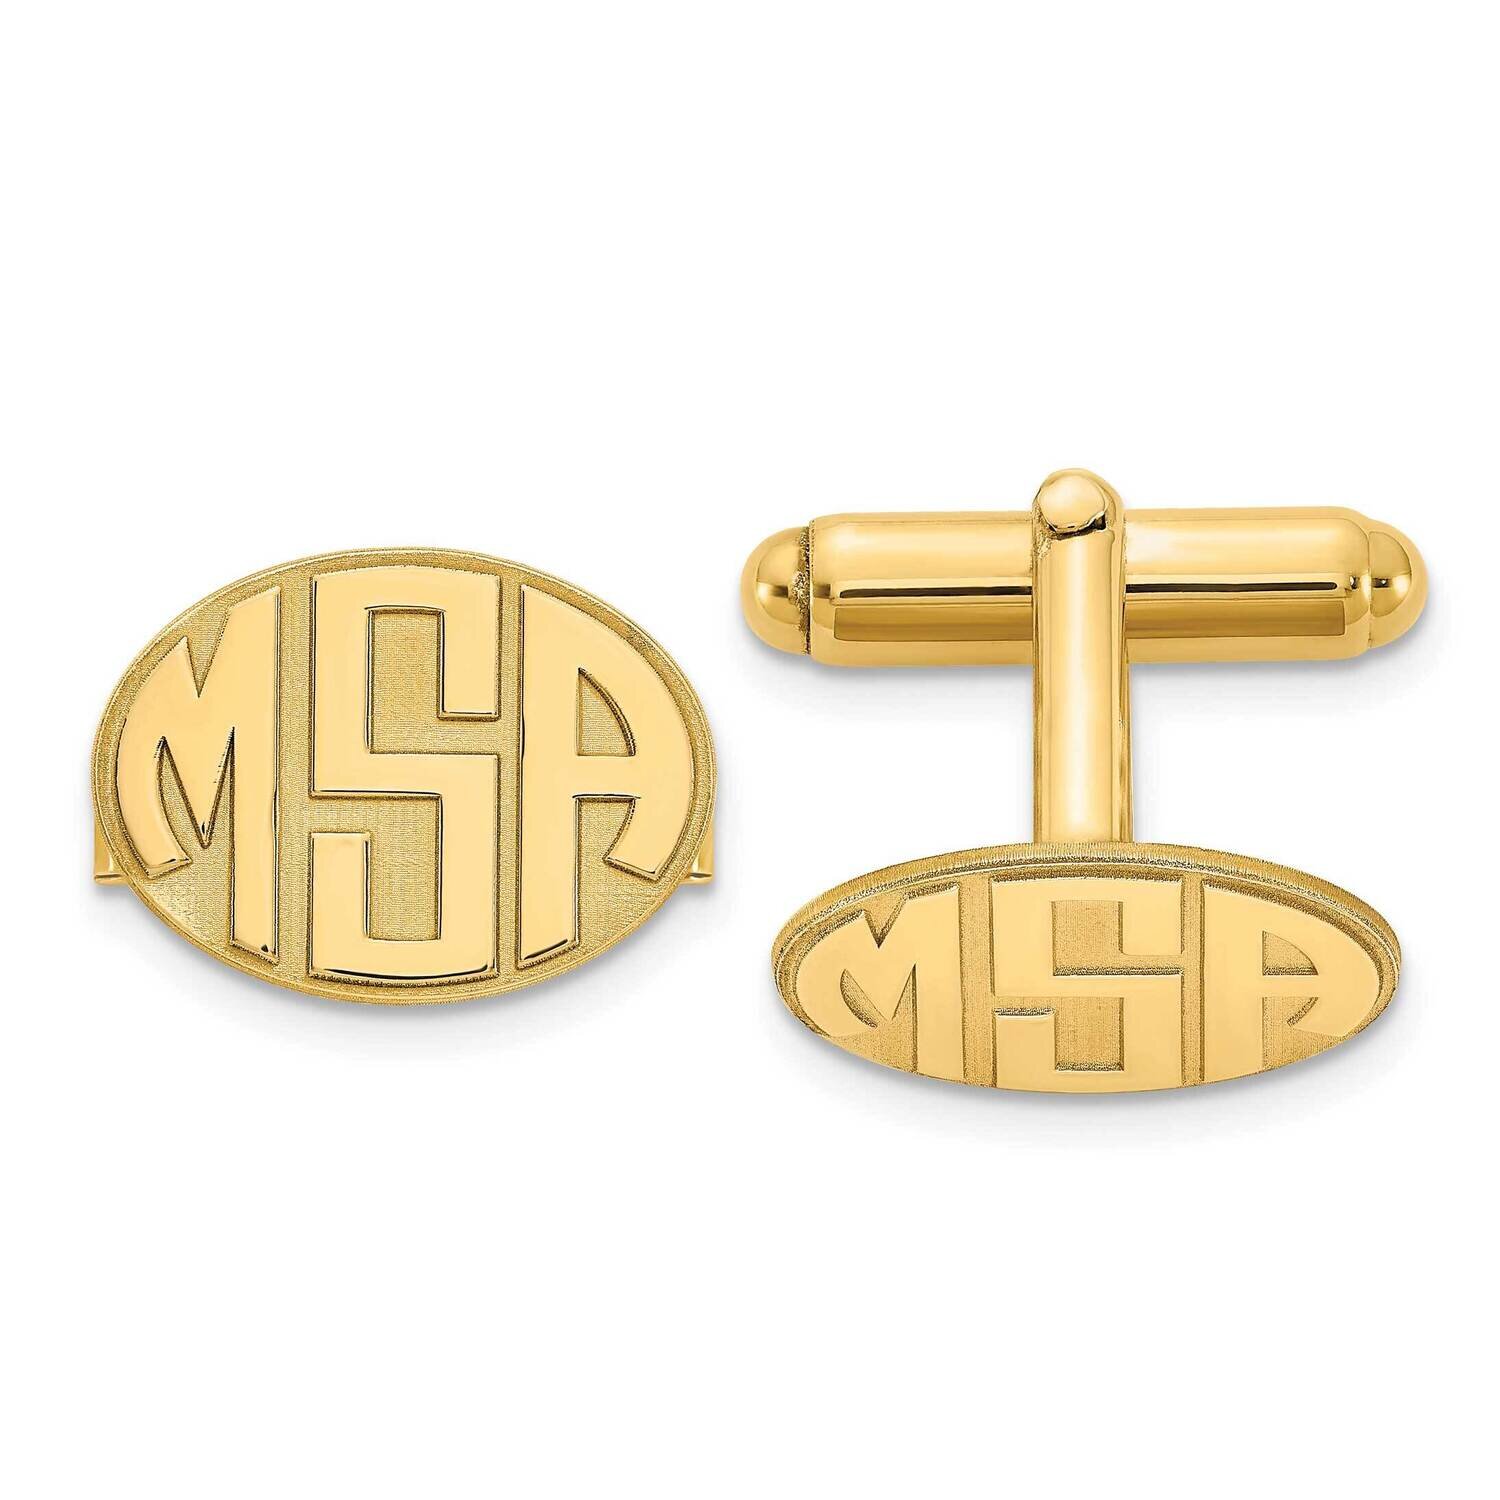 Oval Raised Letters Monogram Cufflinks Sterling Silver Gold-plated XNA620GP